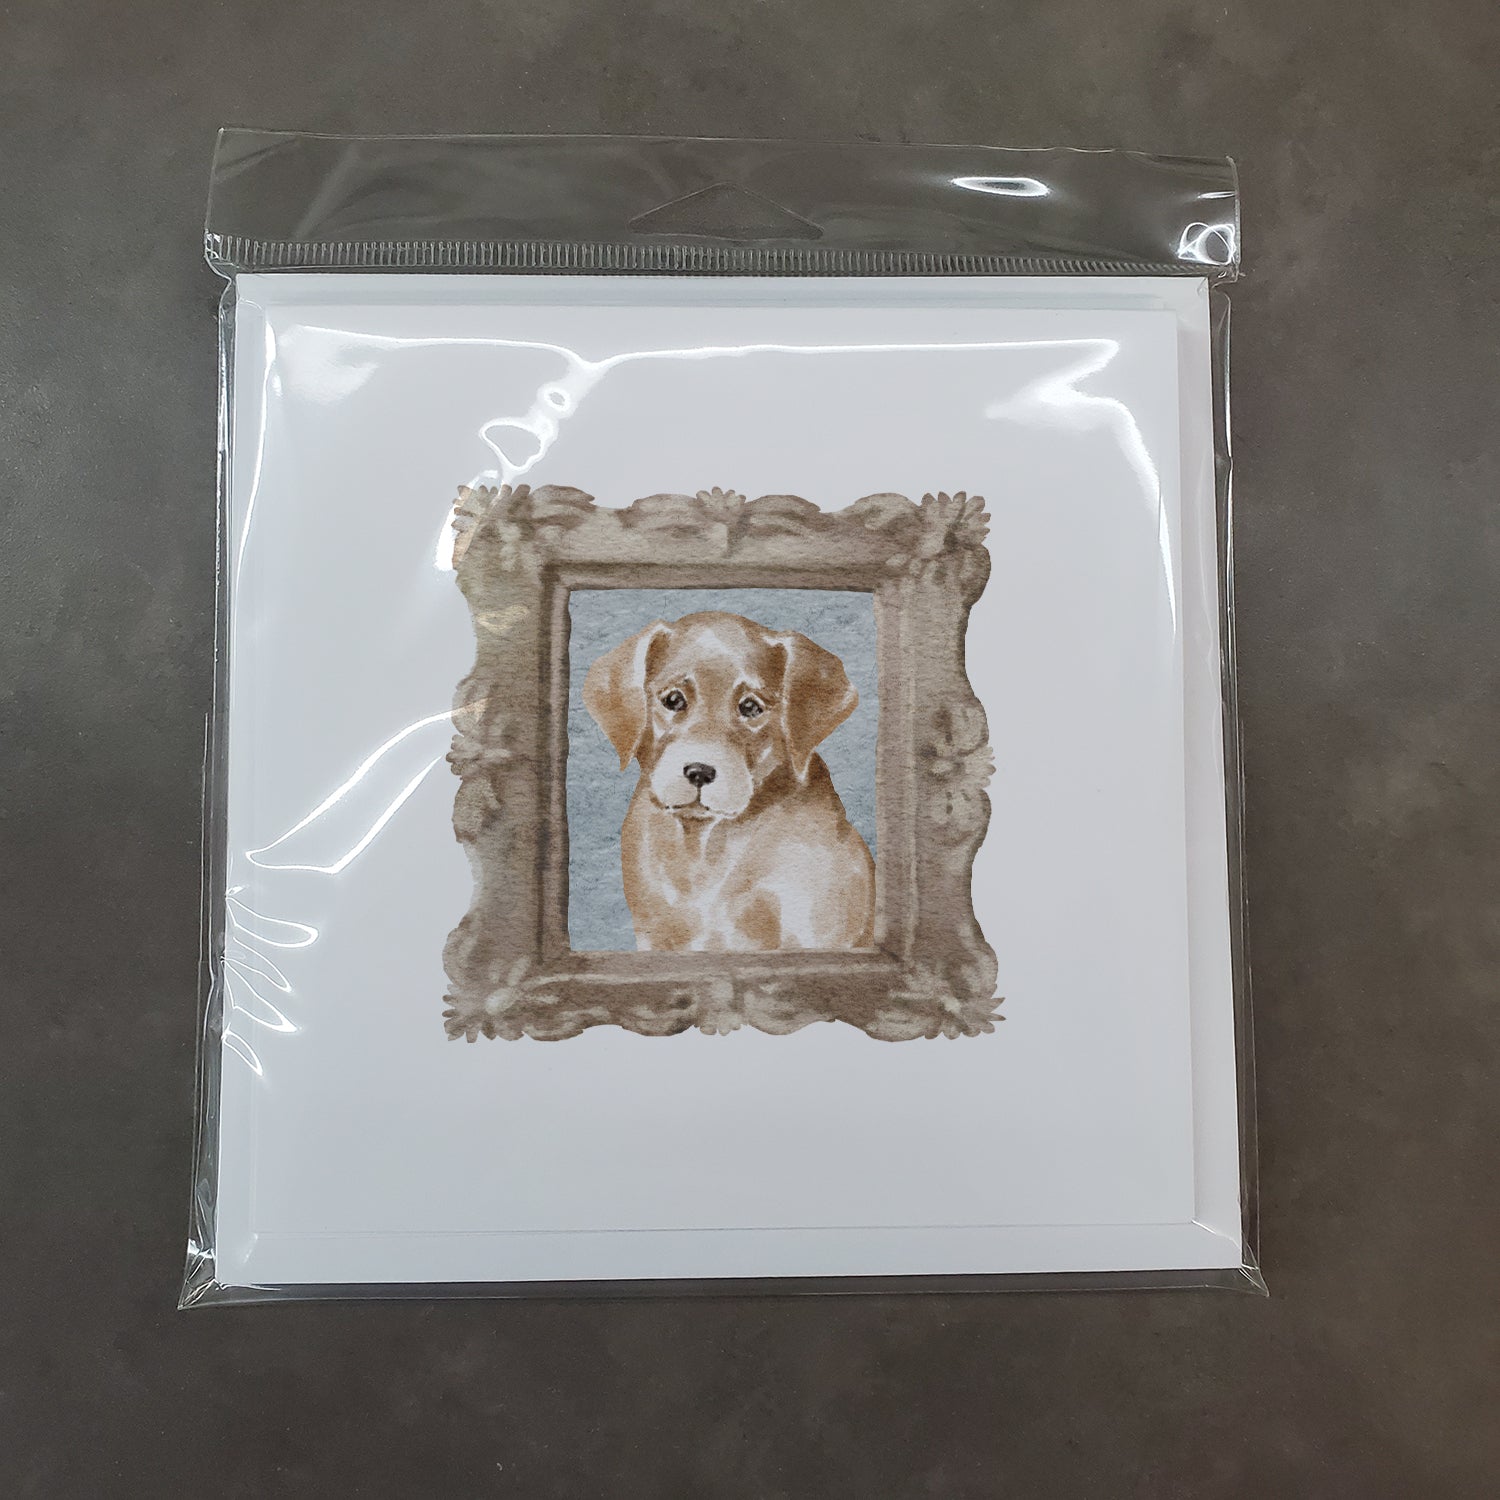 Labrador Retriever Yellow Puppy Front View Square Greeting Cards and Envelopes Pack of 8 - the-store.com